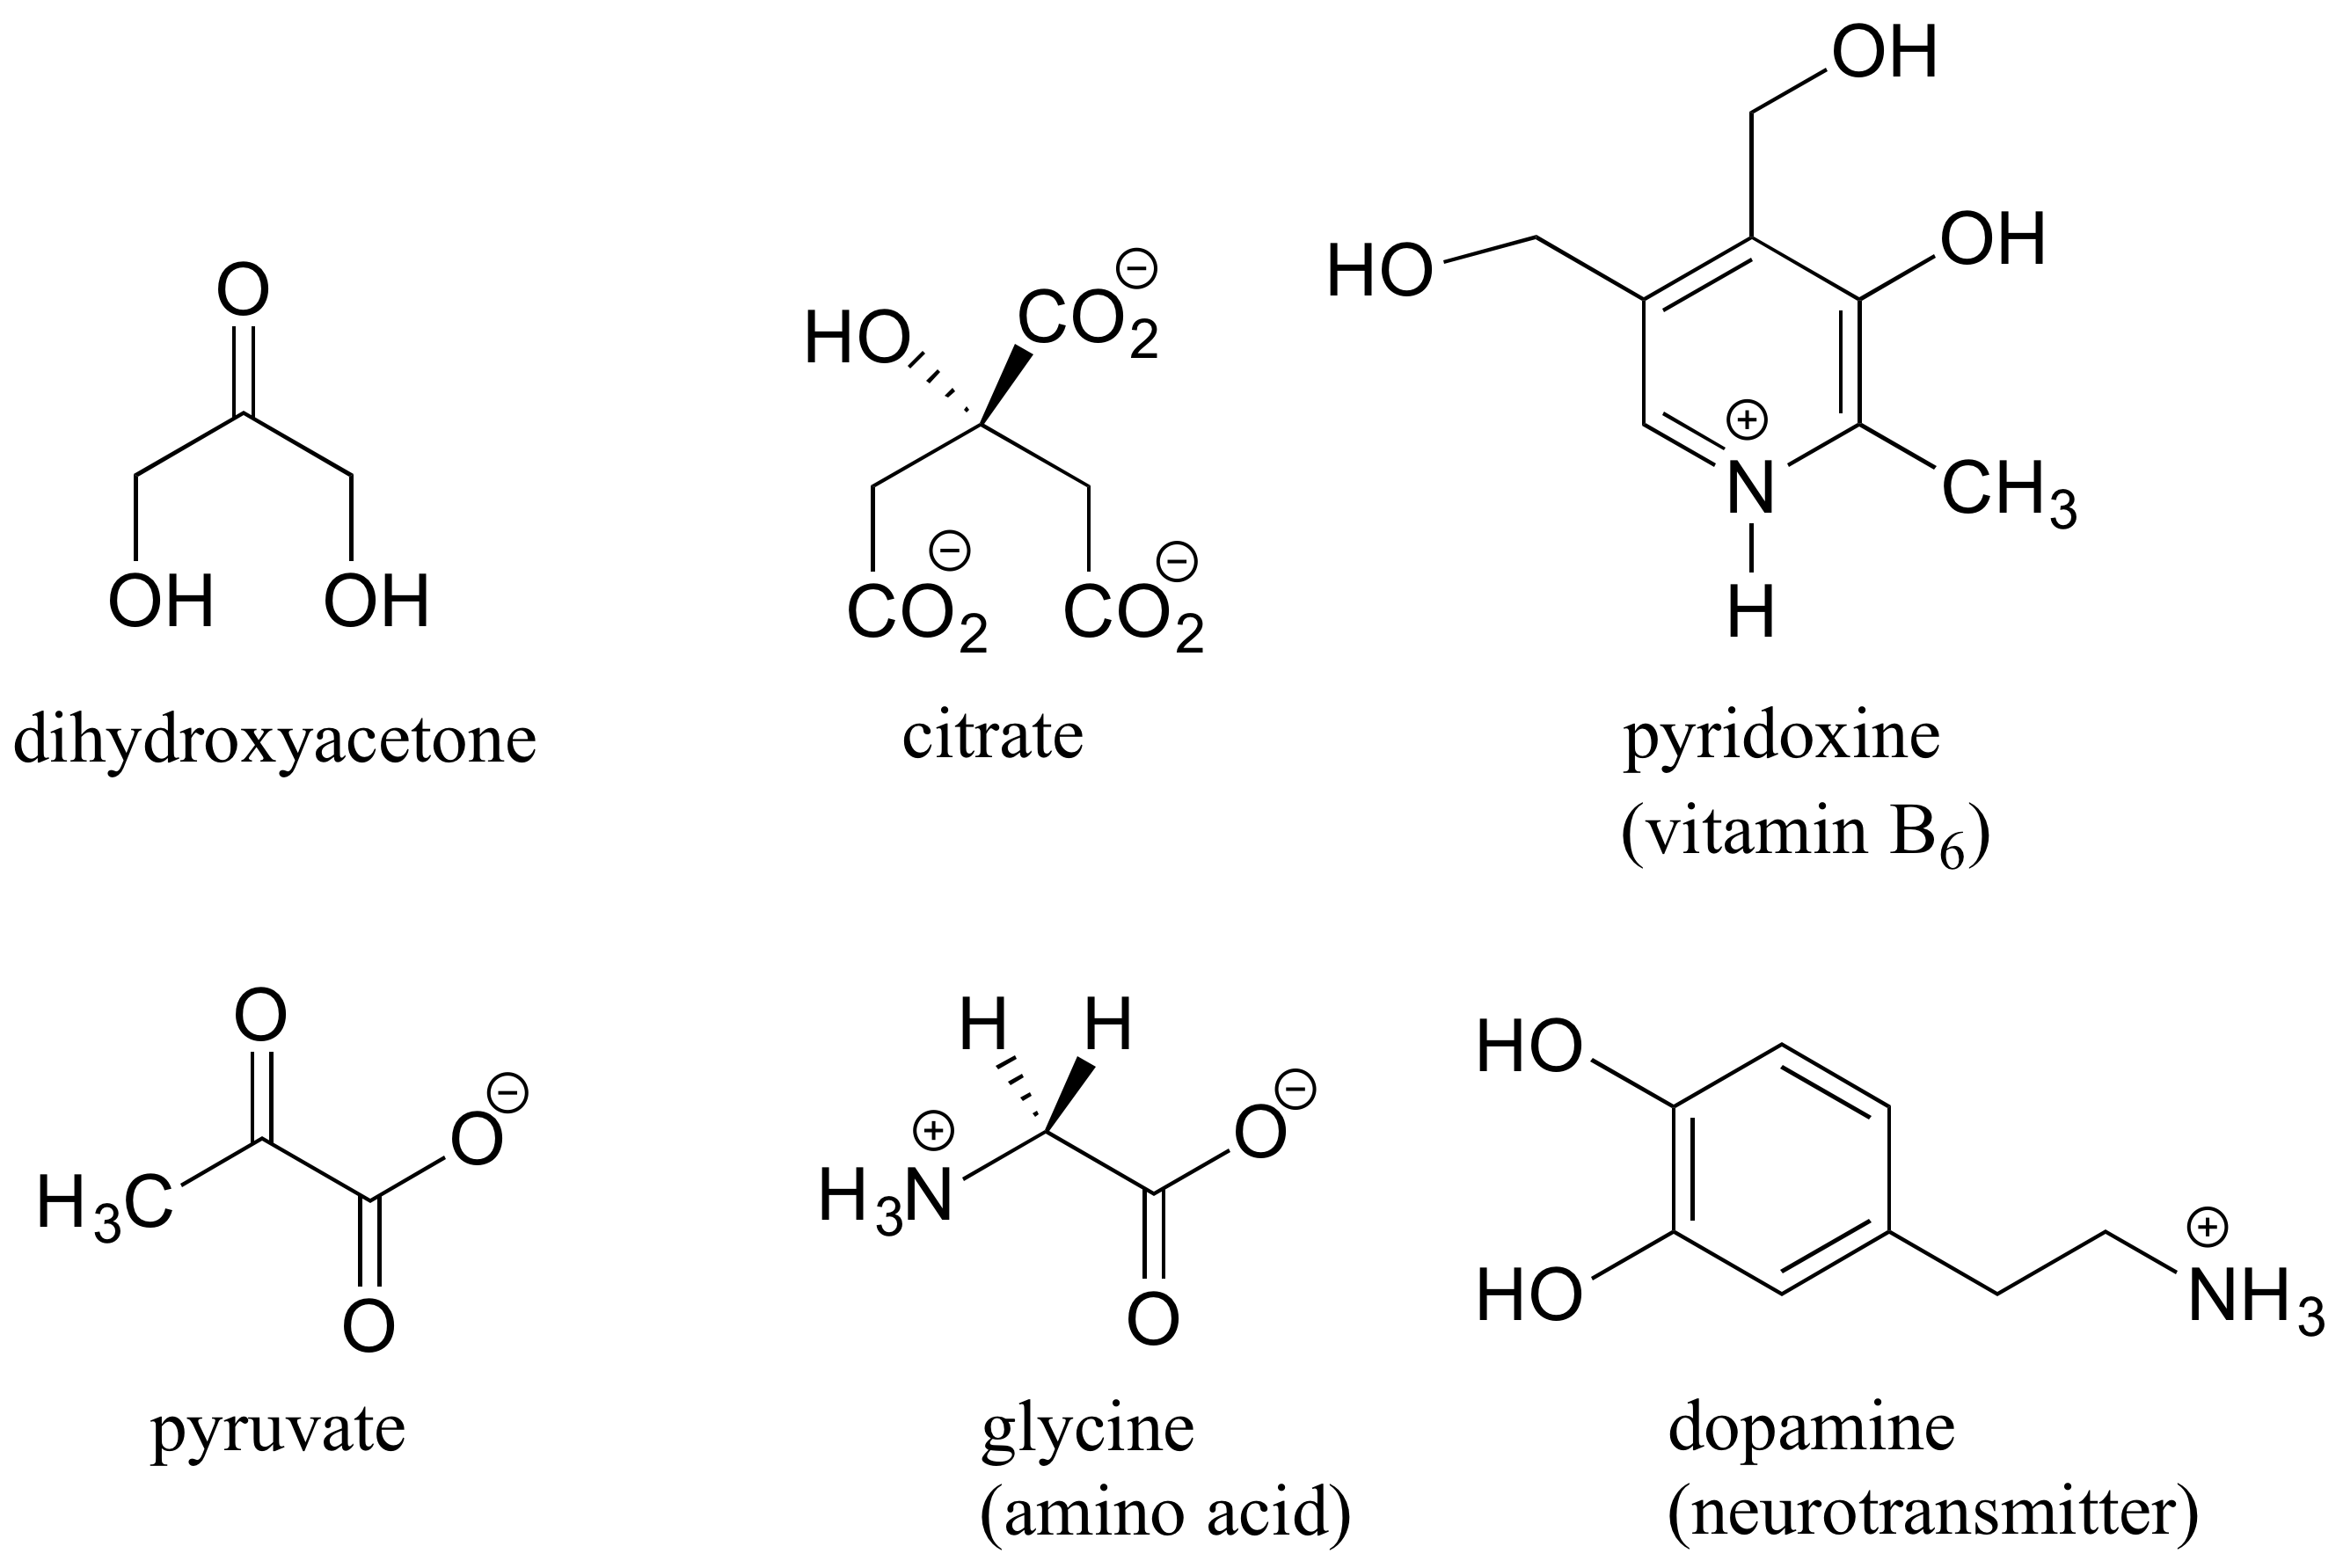 Line bond structures are shown for: dihydroxyacetone, citrate, pyridoxine, pyruvate, glycine and dopamine. Each is a structure with 3 or more carbons and various functional groups. None of these structures contain carbons that meet the criteria for chirality: they have no carbons that are bonded to 4 different groups.